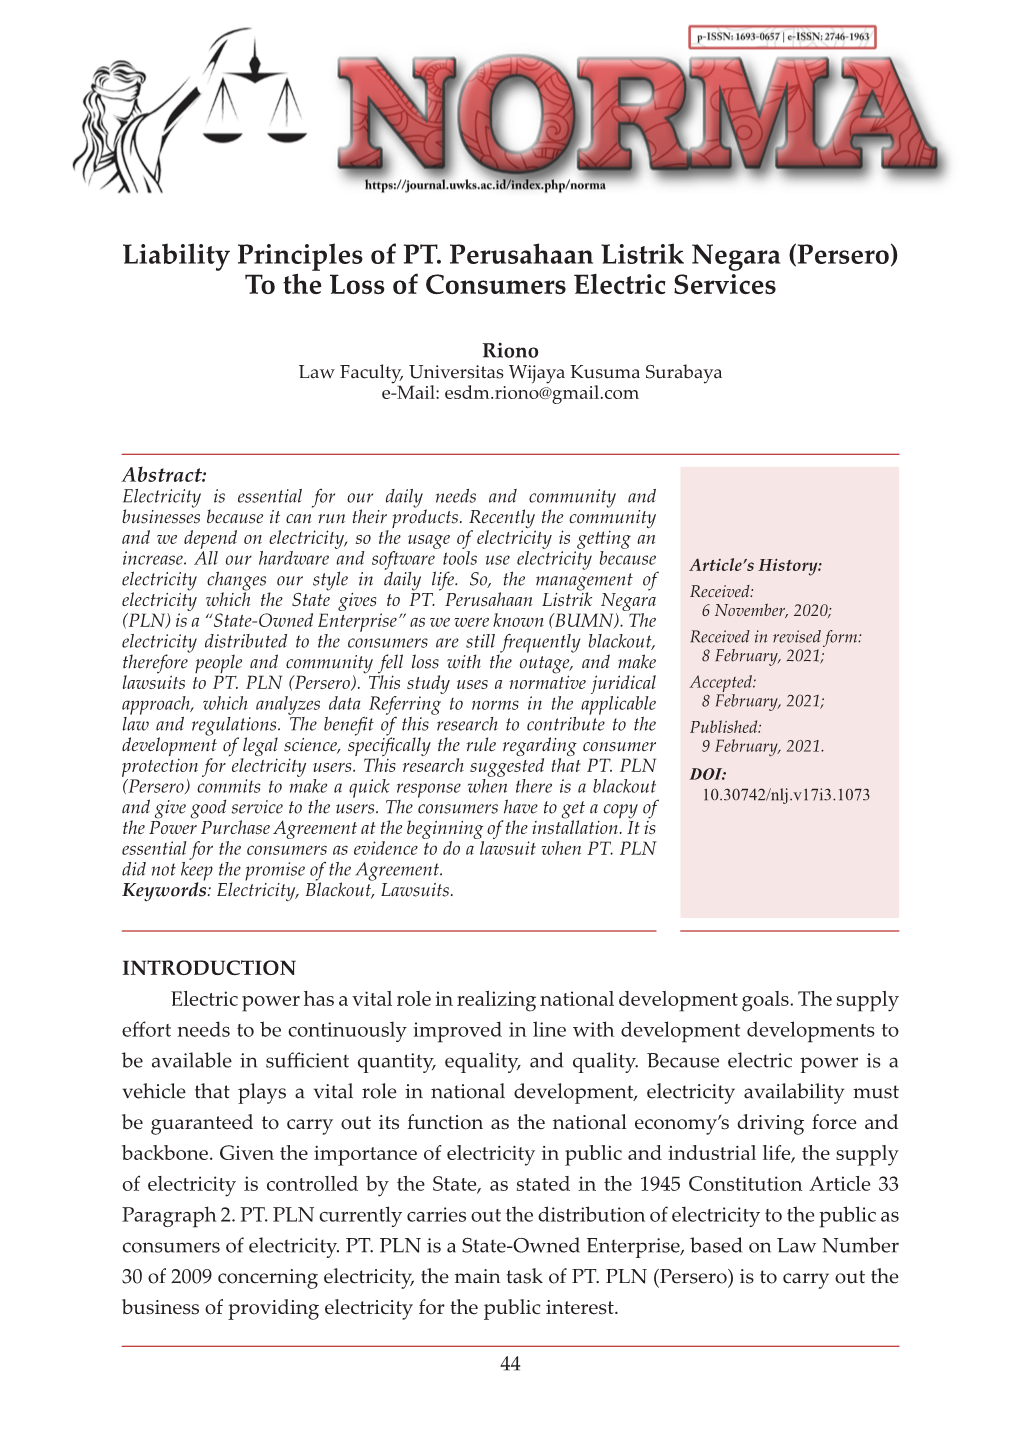 Liability Principles of PT. Perusahaan Listrik Negara (Persero) to the Loss of Consumers Electric Services